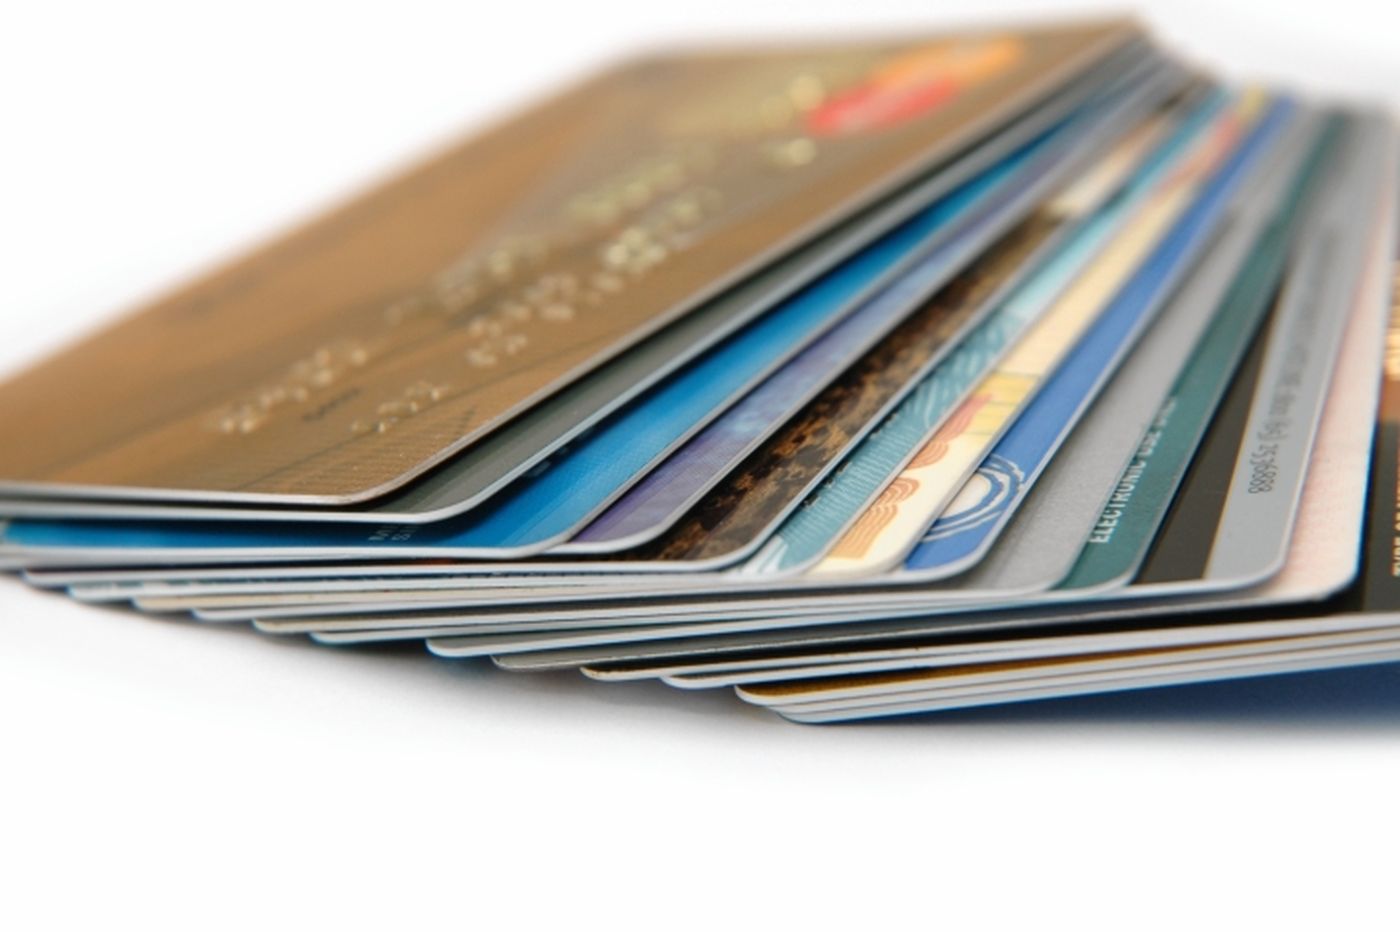 Lower interest rate compared to credit cards